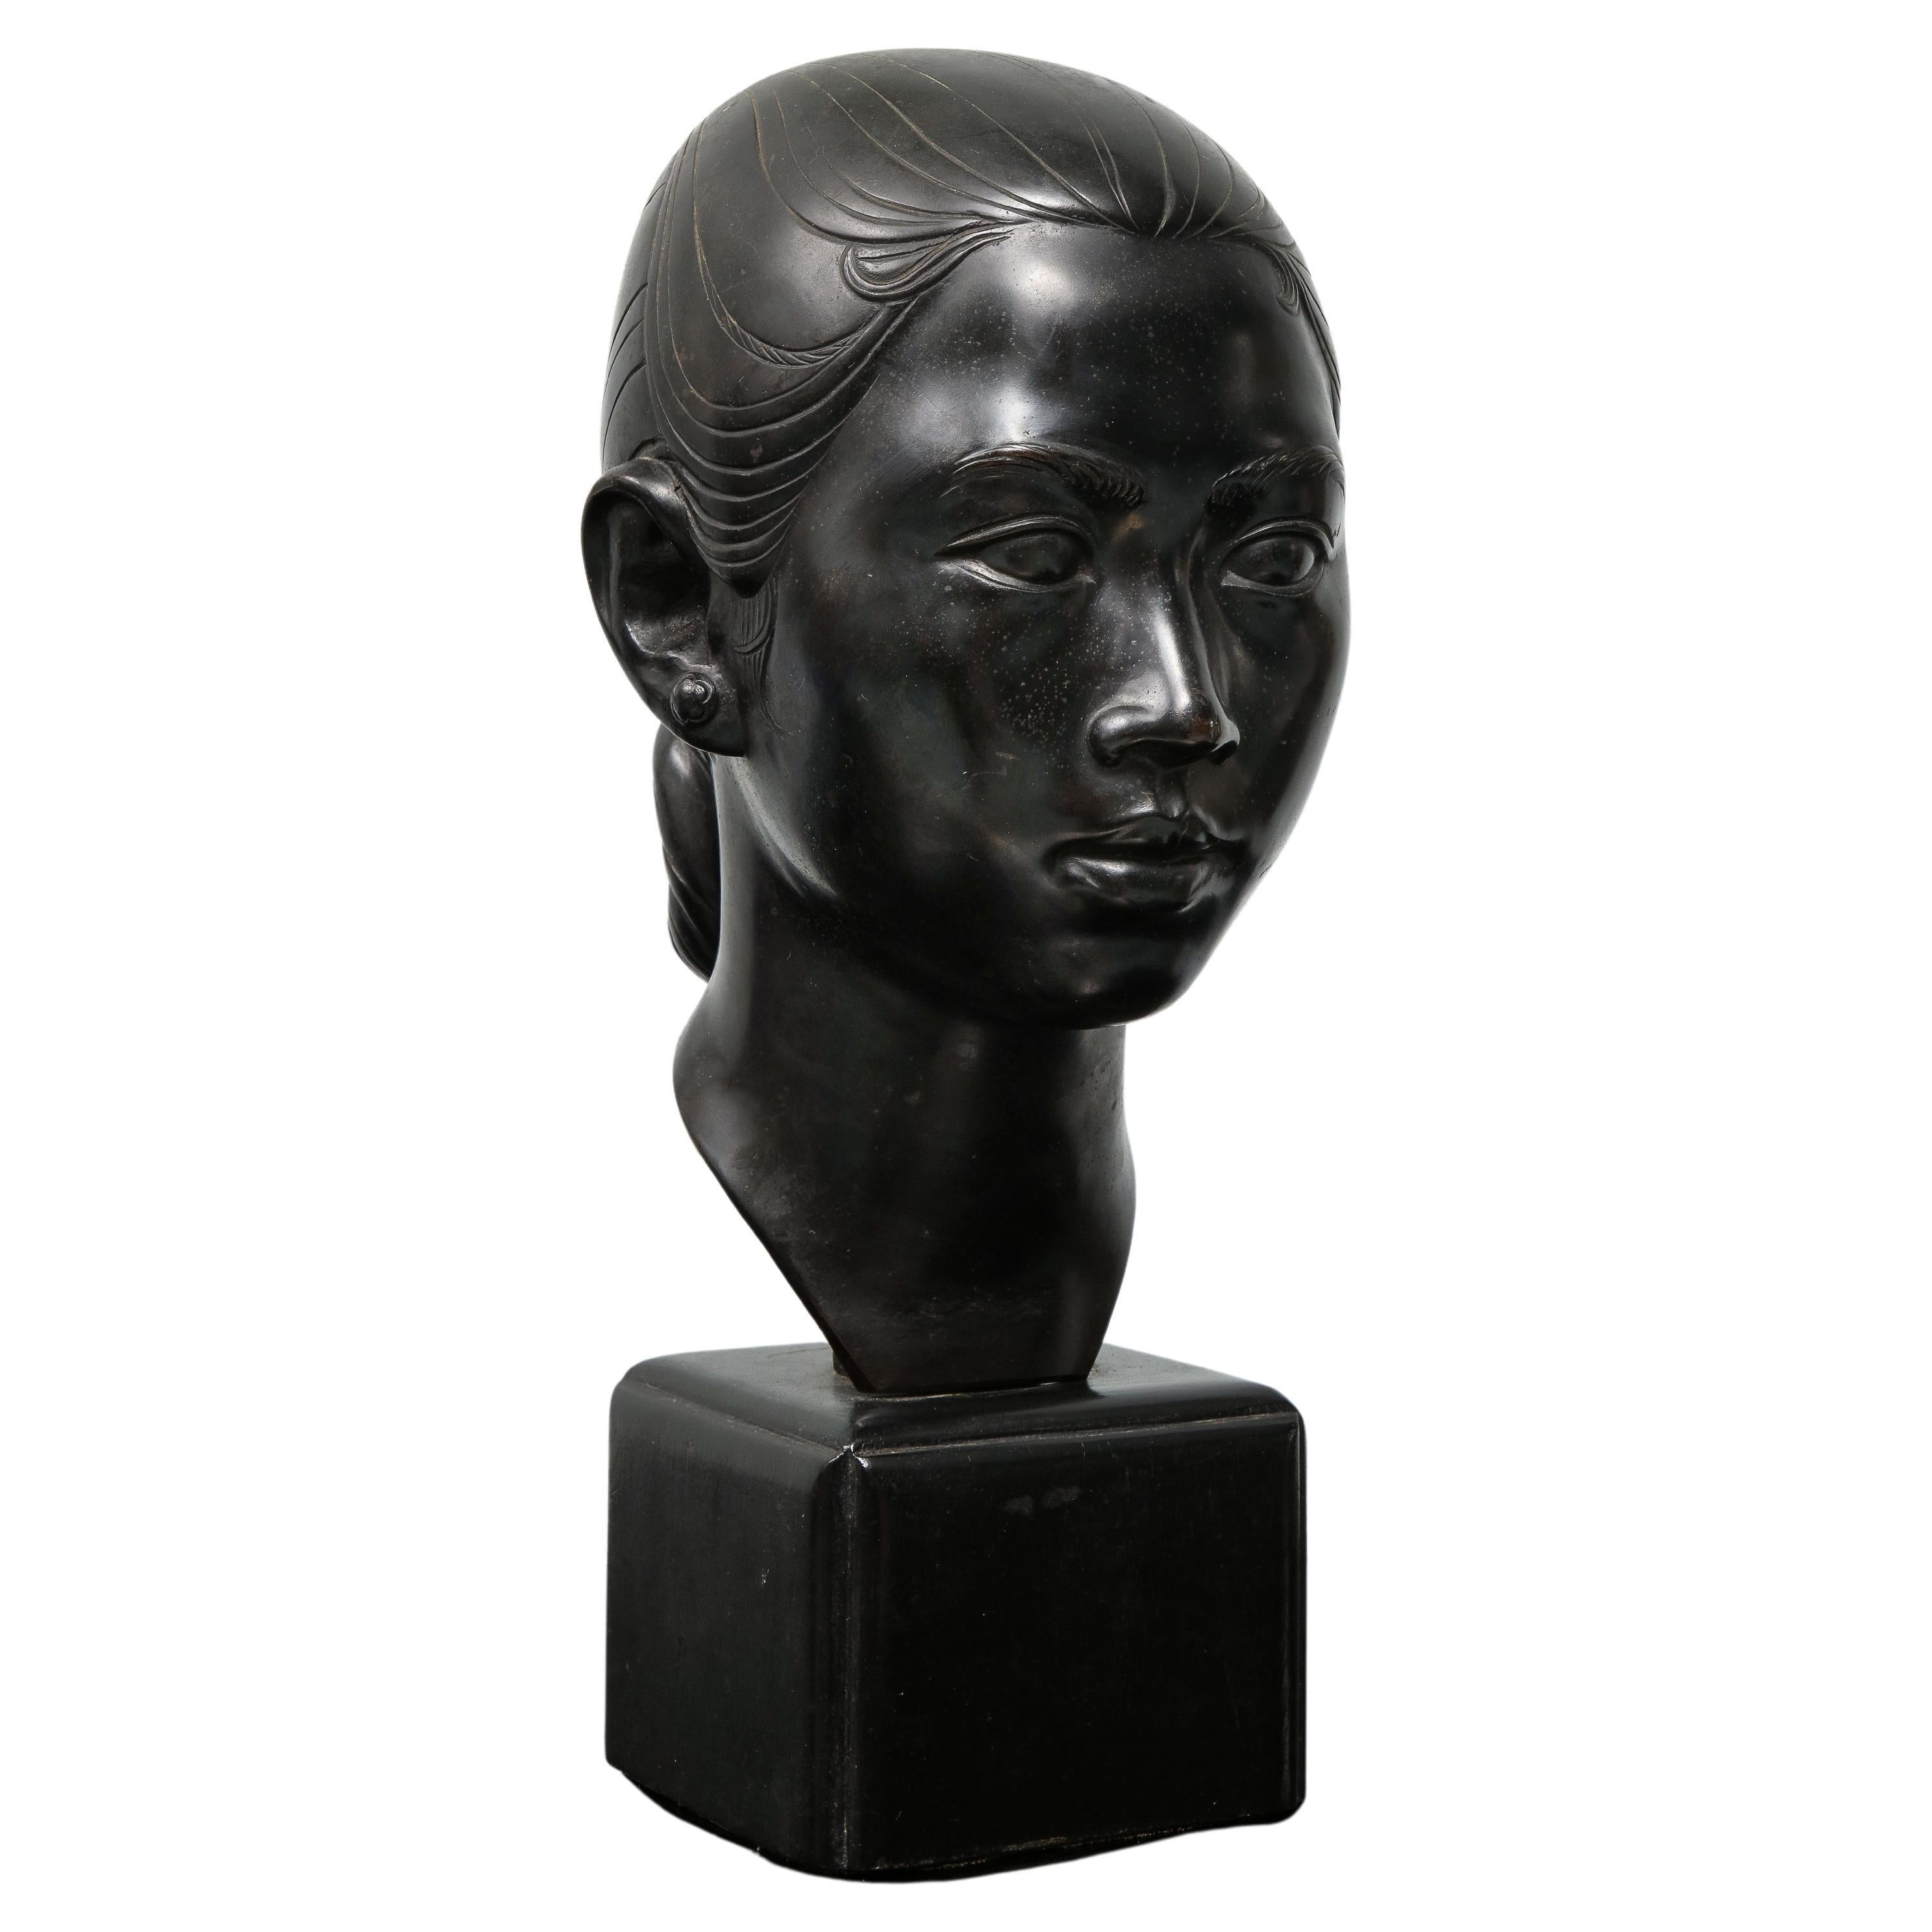 Le Van Mau (1917-2003) was a Vietnamese sculptor. This is a black patinated bronze on its original wooden cube base. It is signed on the back of the neck in Chinese characters. It is from the 40's. 